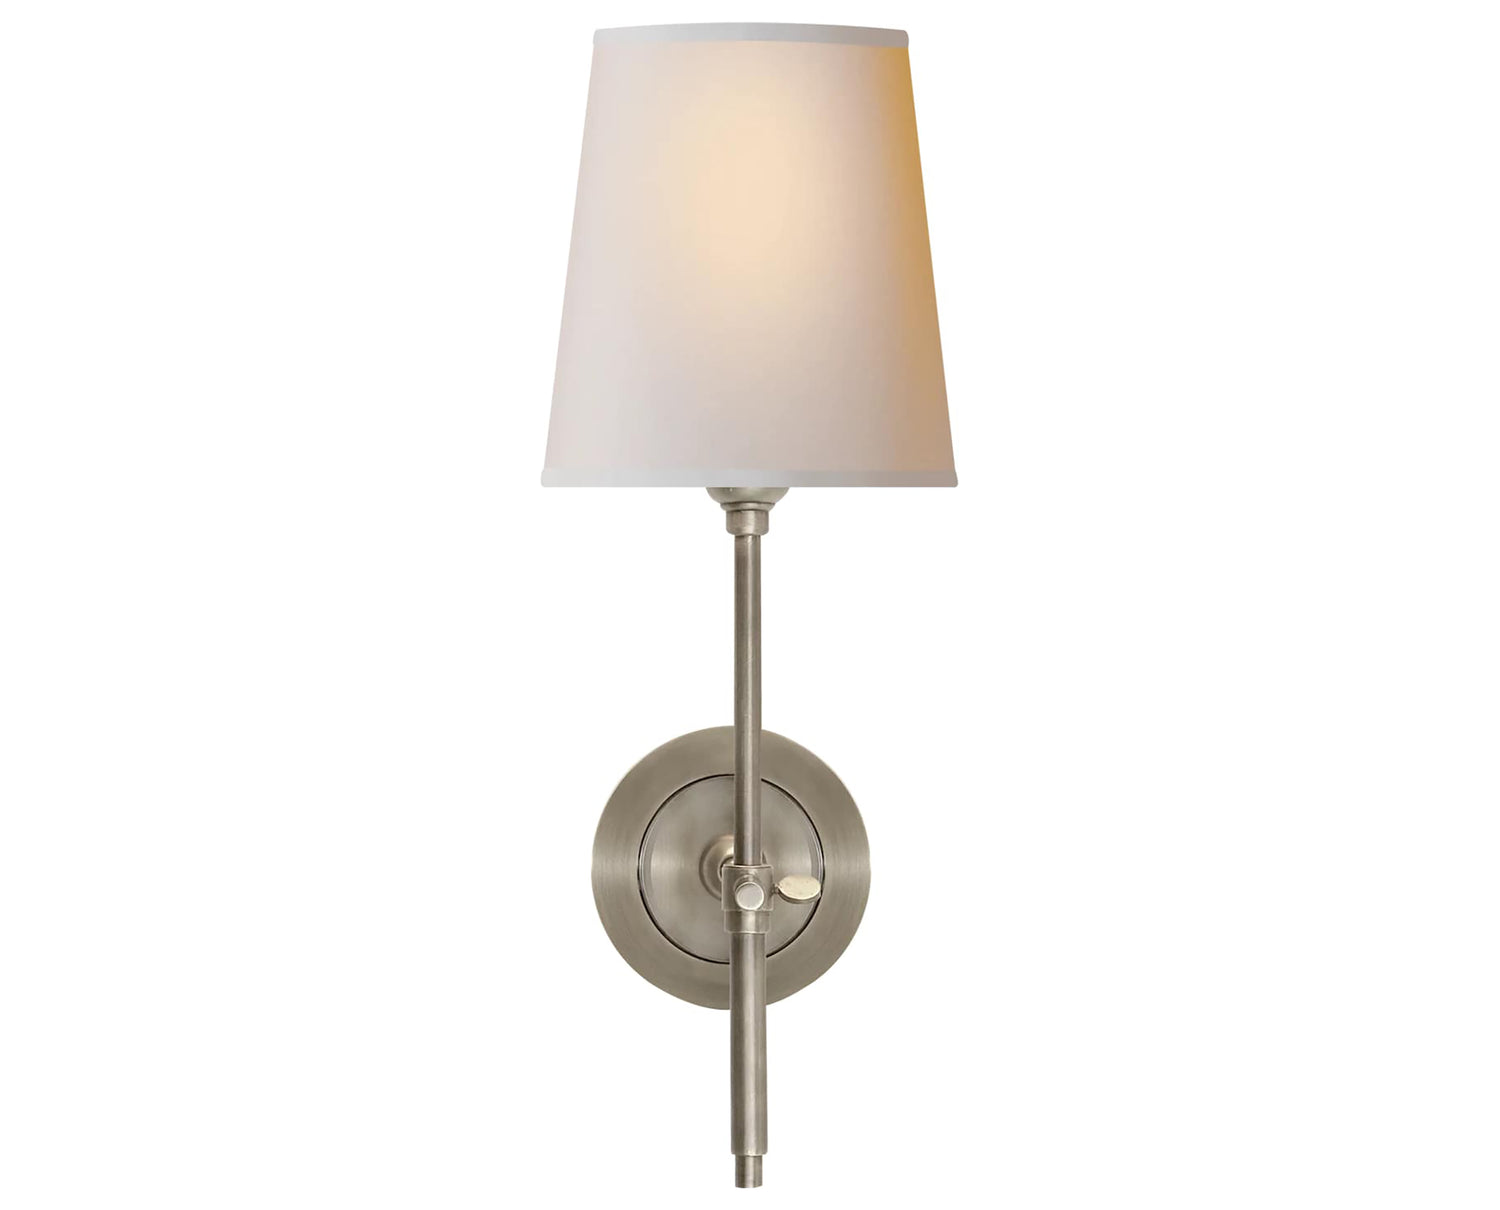 Antique Nickel and Natural Paper | Bryant Sconce - Natural Paper Shade | Valley Ridge Furniture